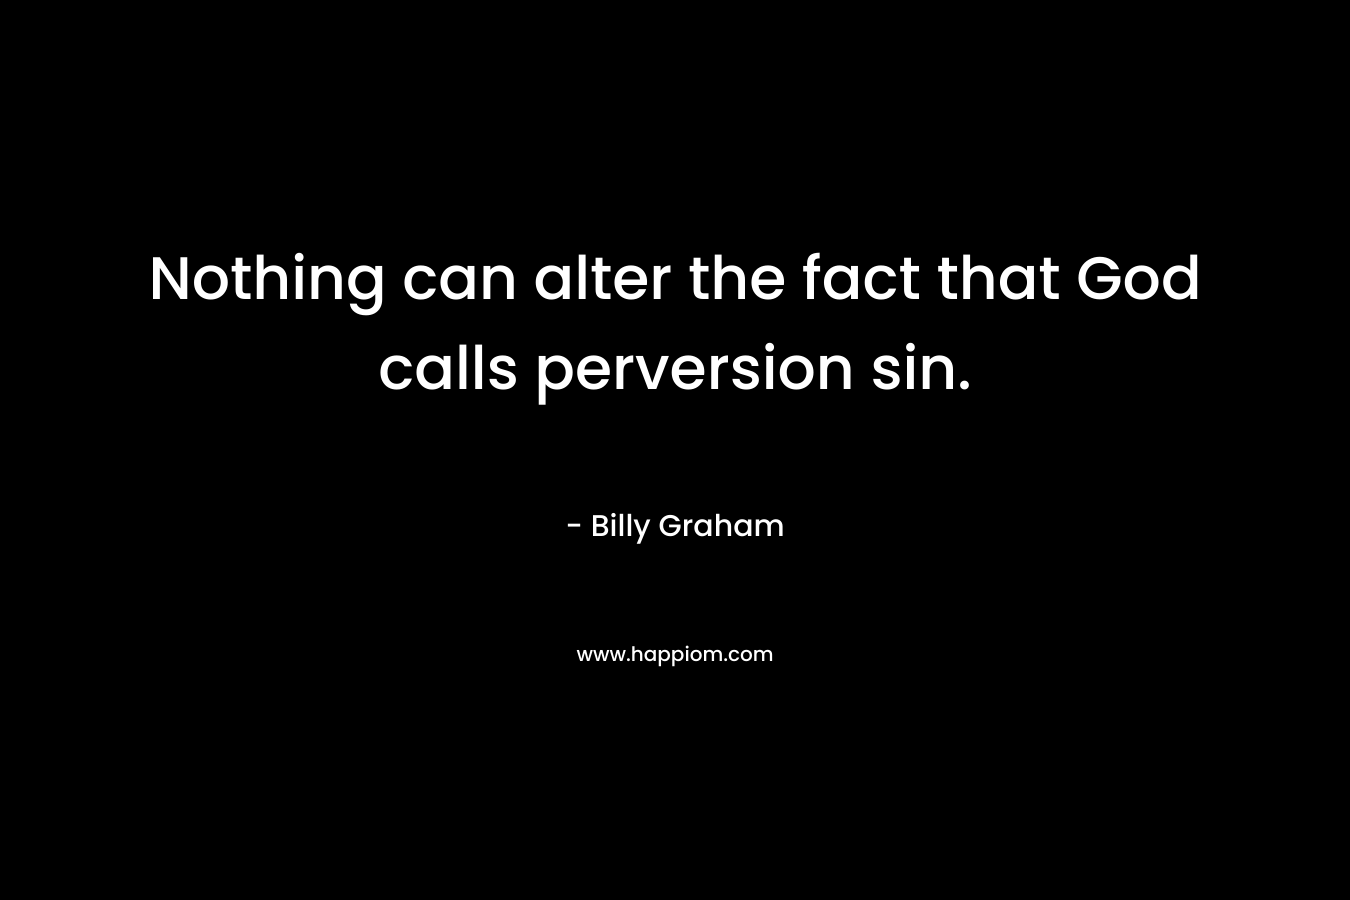 Nothing can alter the fact that God calls perversion sin. – Billy Graham